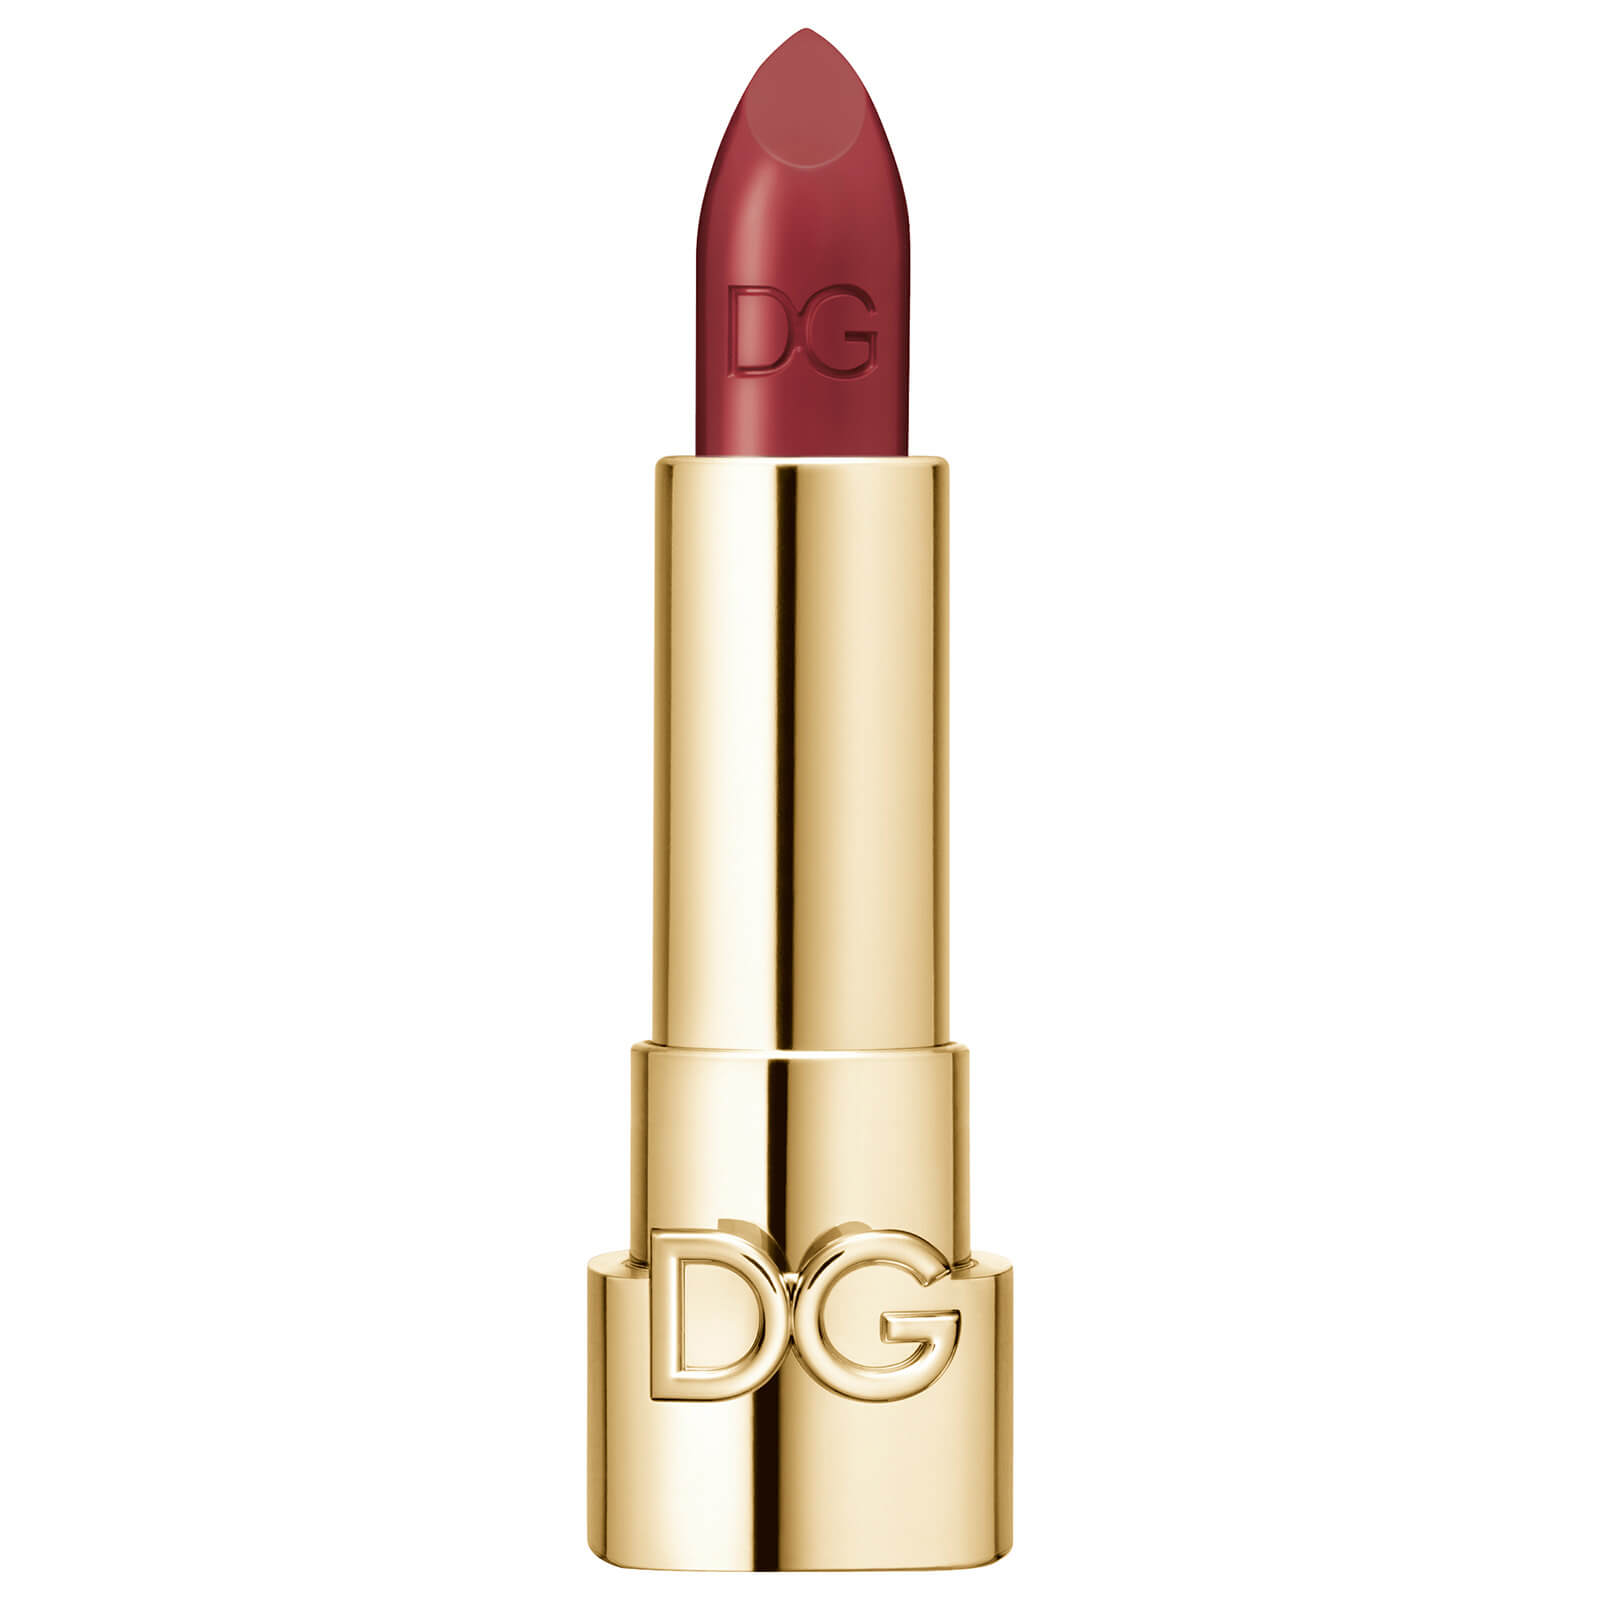 Image of Dolce&Gabbana The Only One Lipstick 1.7g (No Cap) (Various Shades) - 660 Hot Burgundy